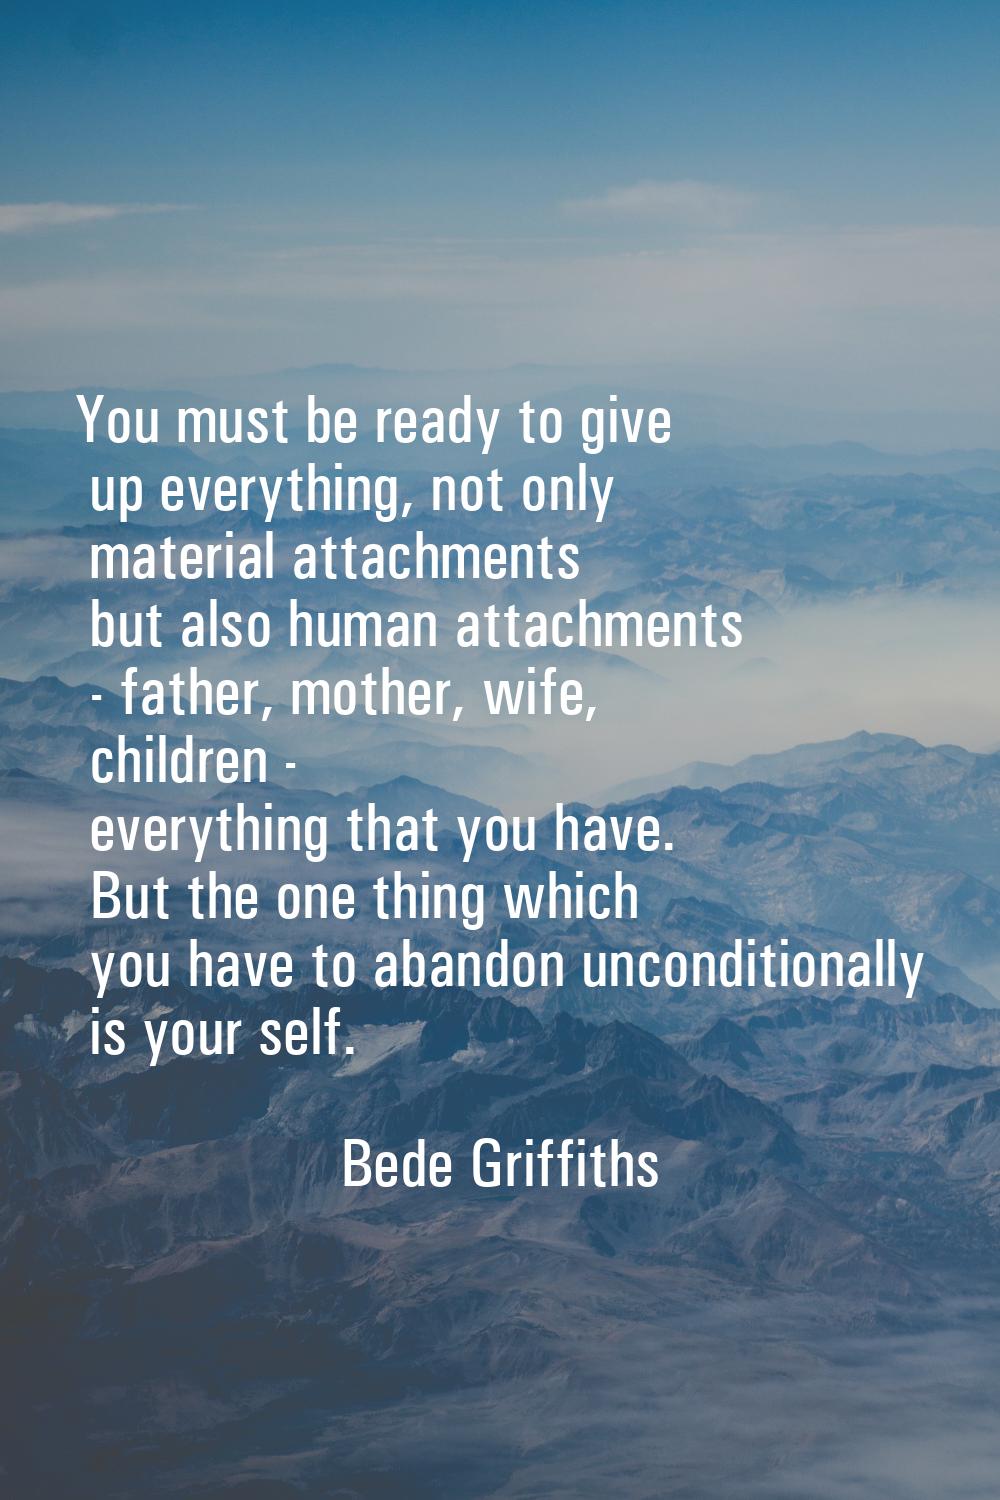 You must be ready to give up everything, not only material attachments but also human attachments -